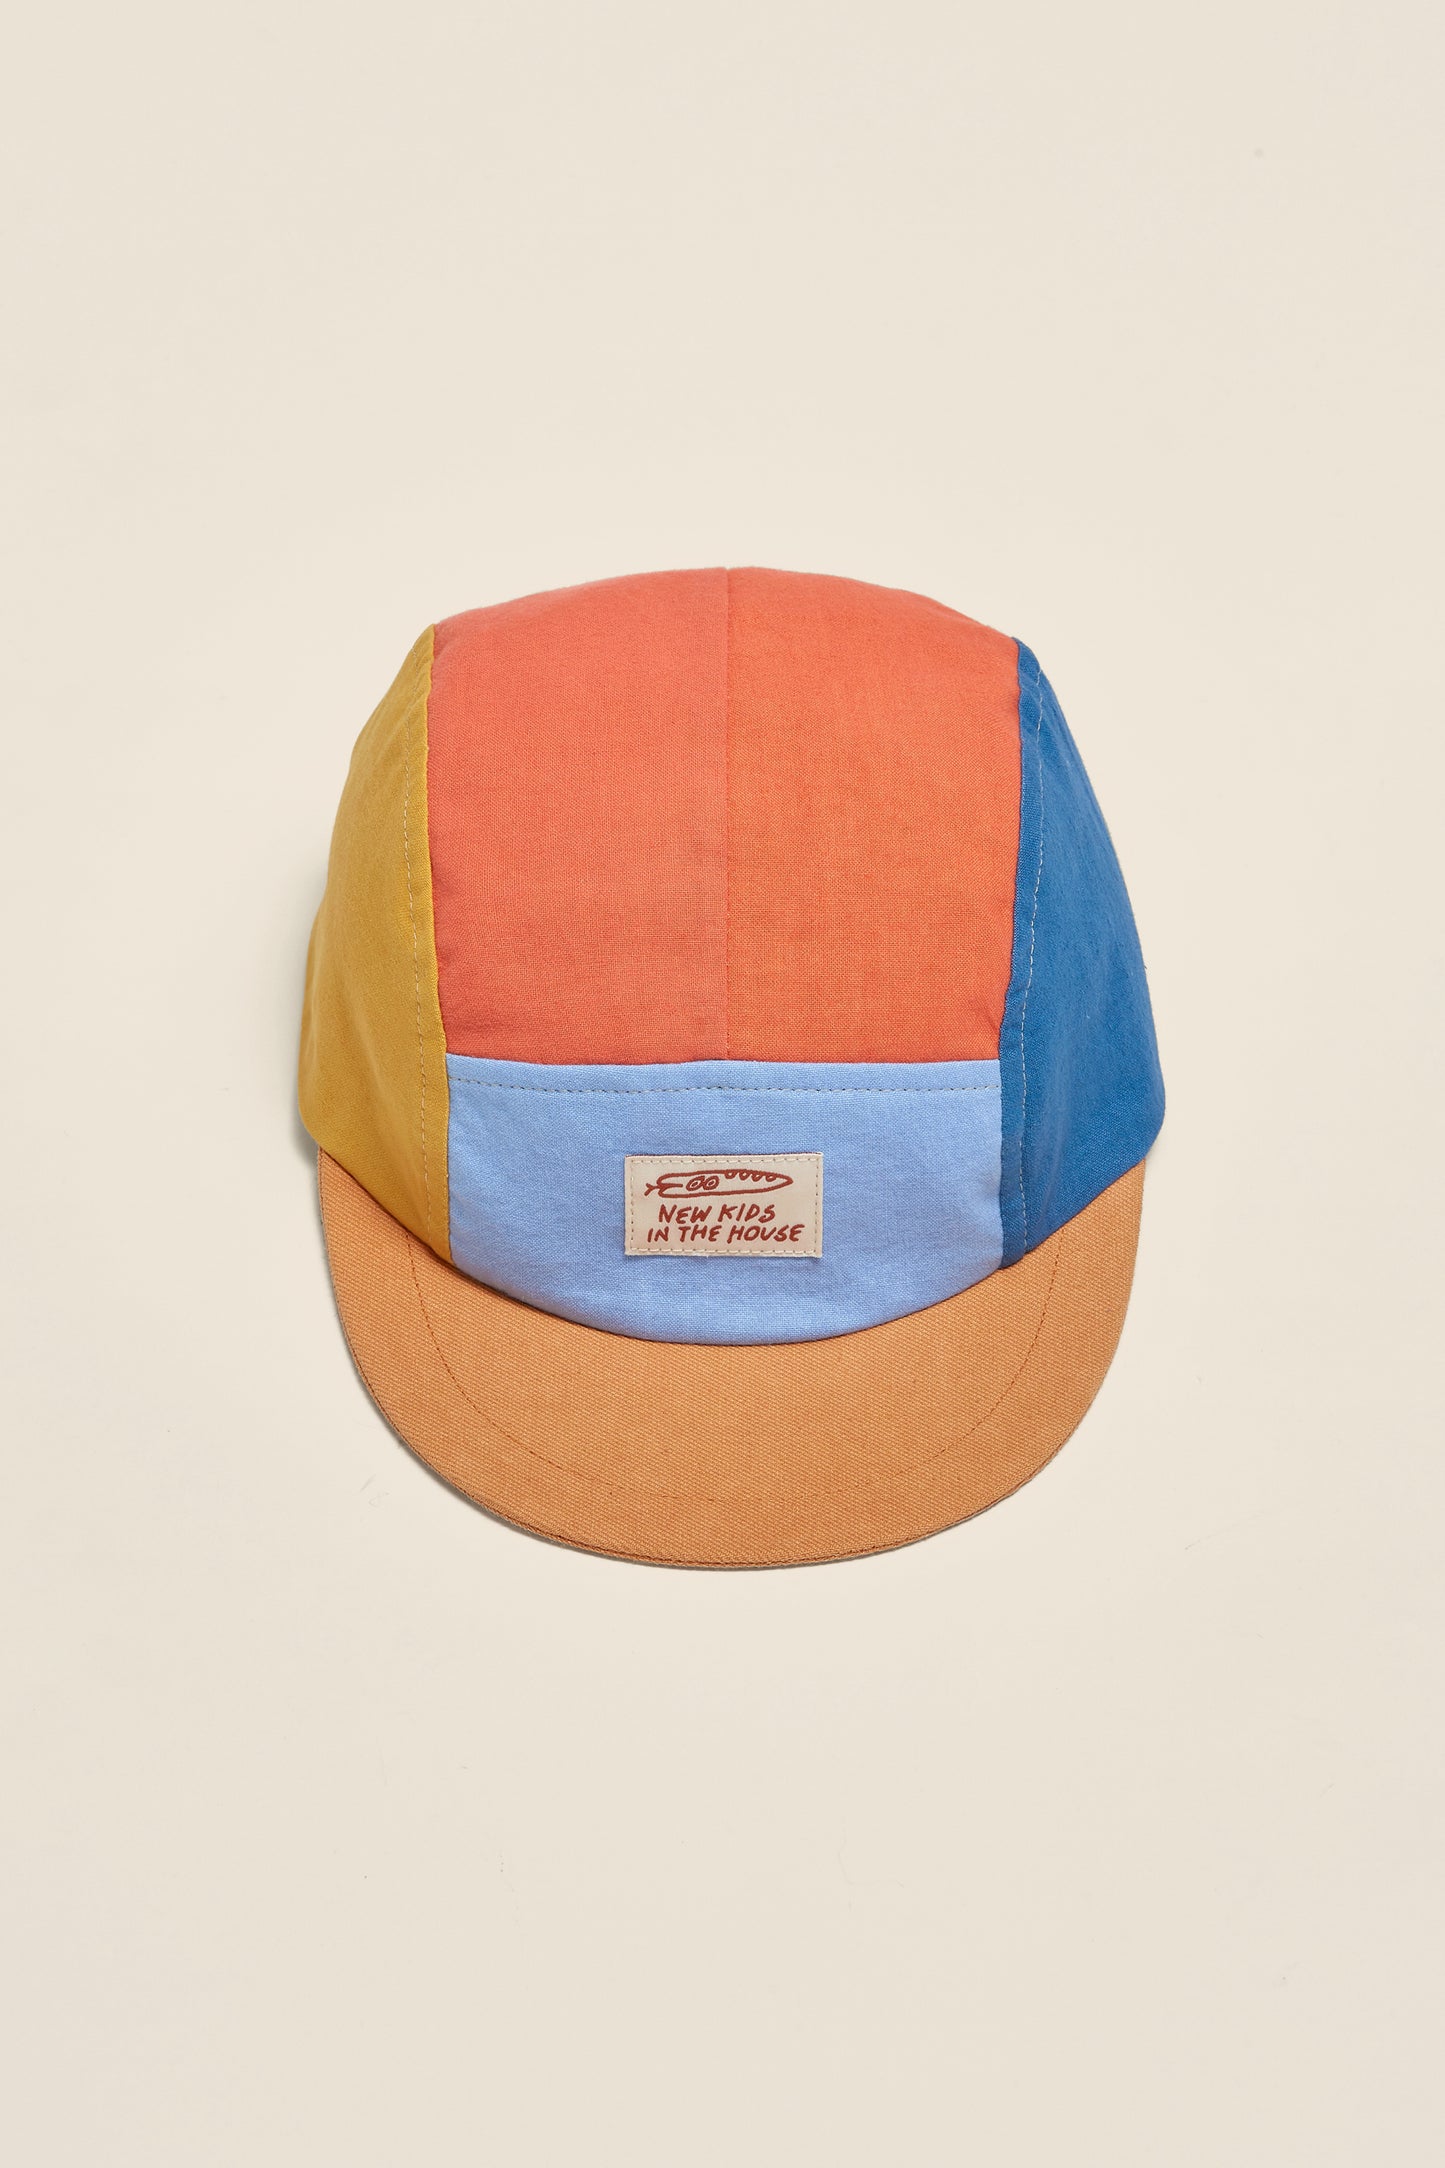 Calvin is a 5-panel cap for kids aged between 2 and 6. It is adjustable, so it grows with your kid. Made from pre-used bedlinen, with cotton lining & soft visor. - Made in Germany